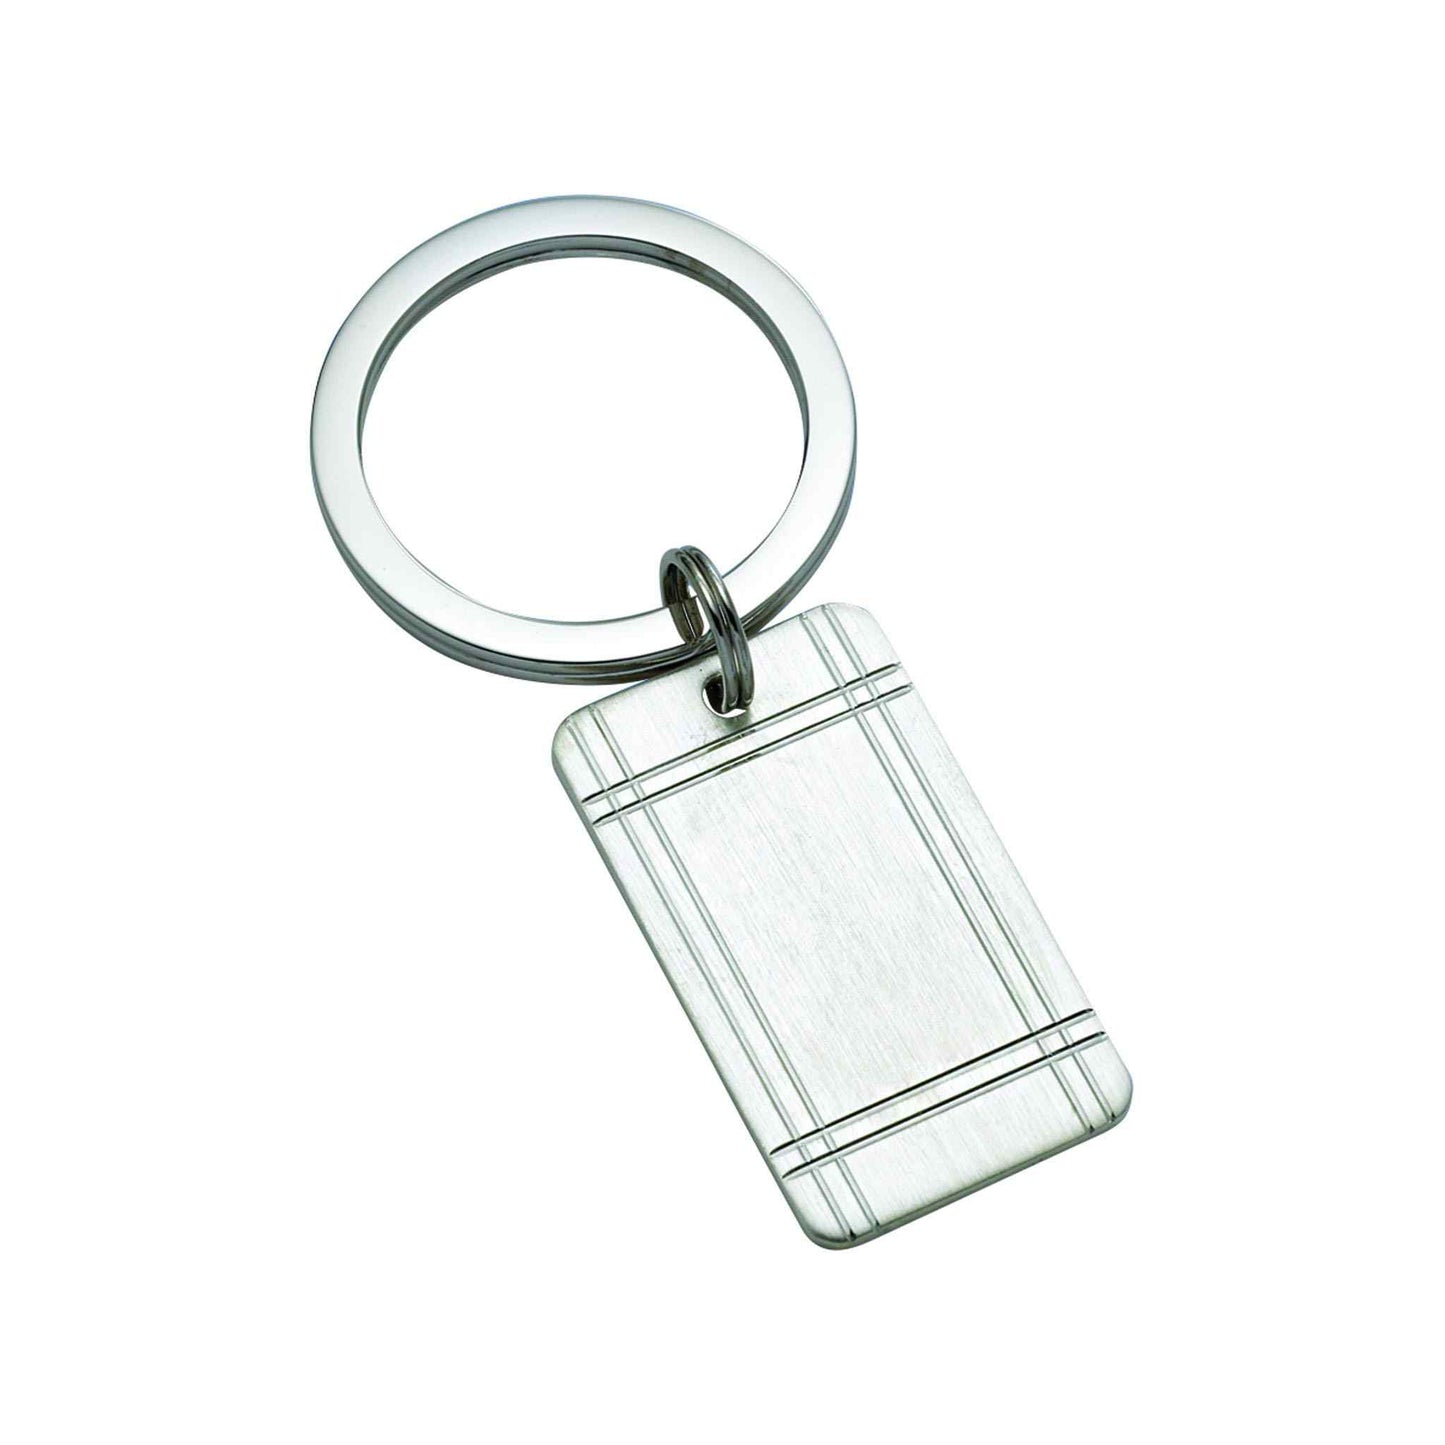 A sterling silver rectangle key ring satined with engine-turned tartan displayed on a neutral white background.